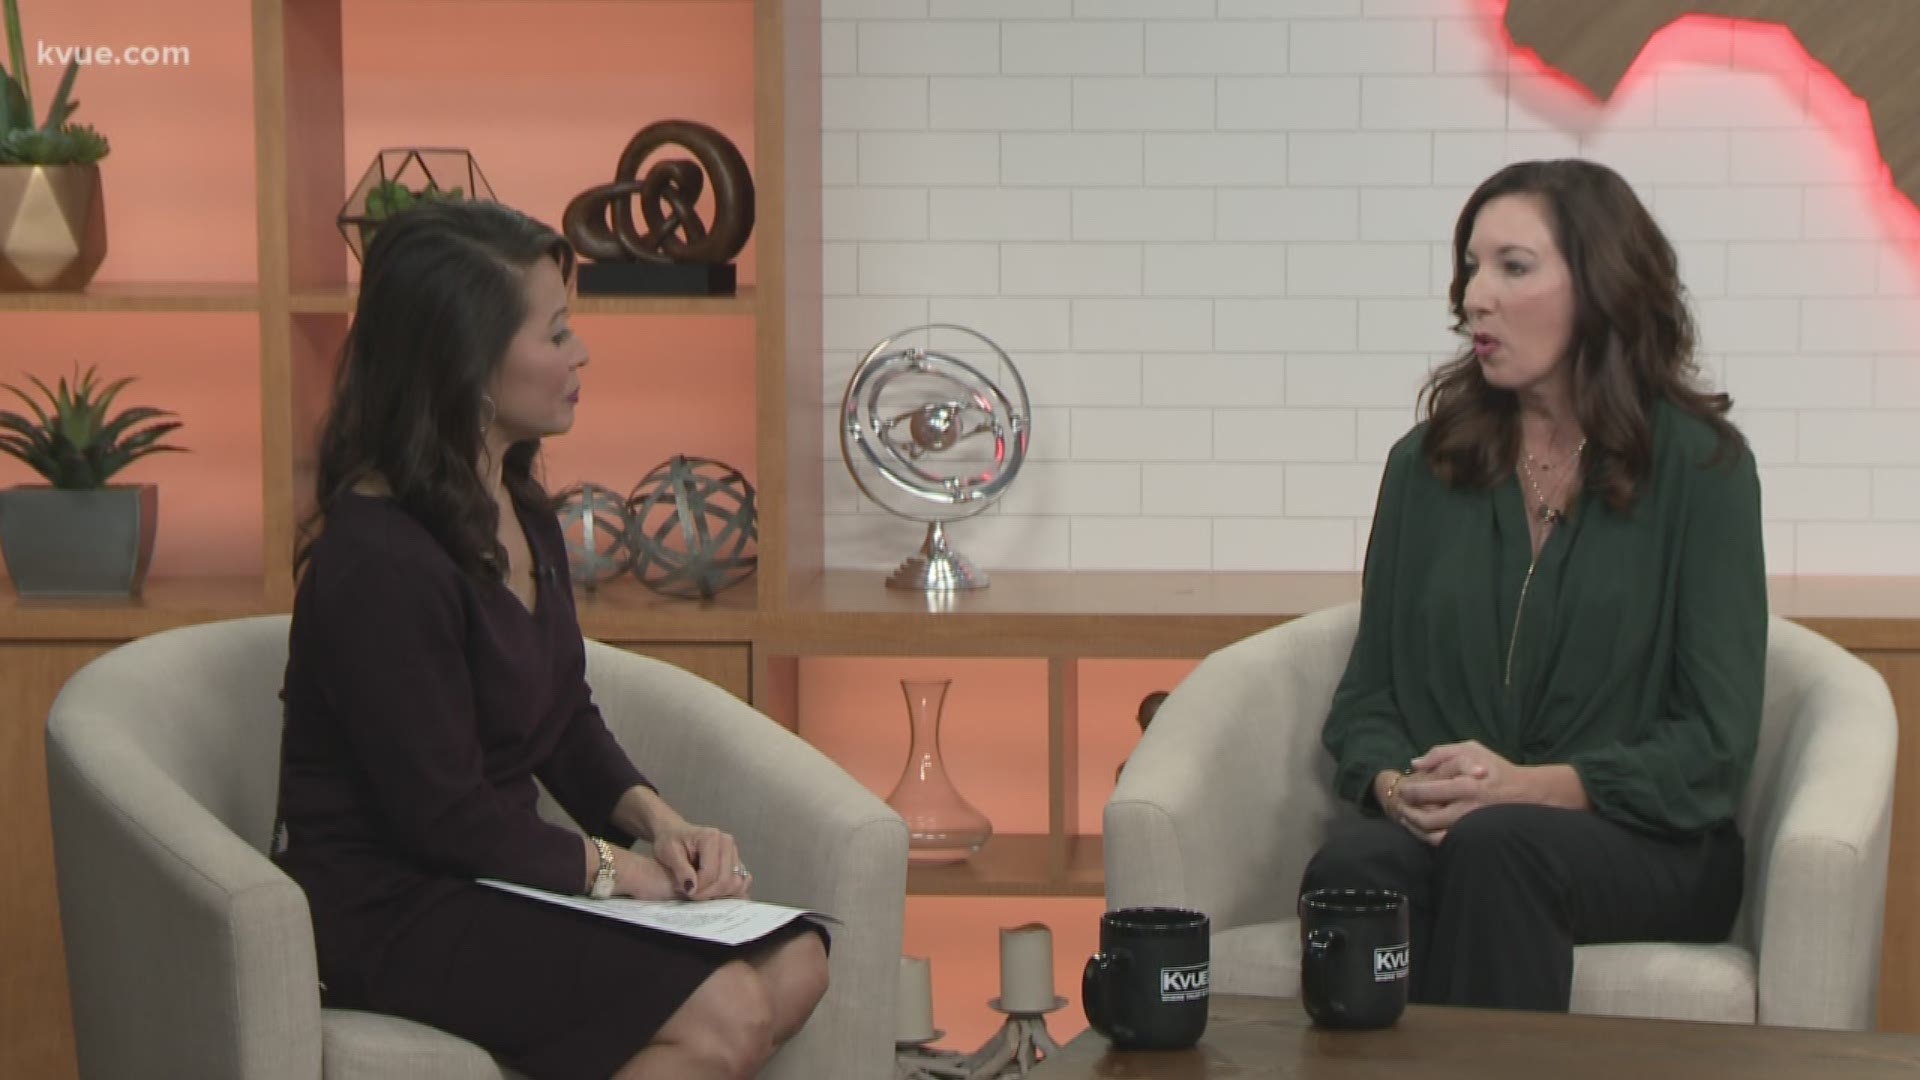 October is small business month. FranNet is here to talk about the rise of women business owners and the importance of women becoming entrepreneurs.